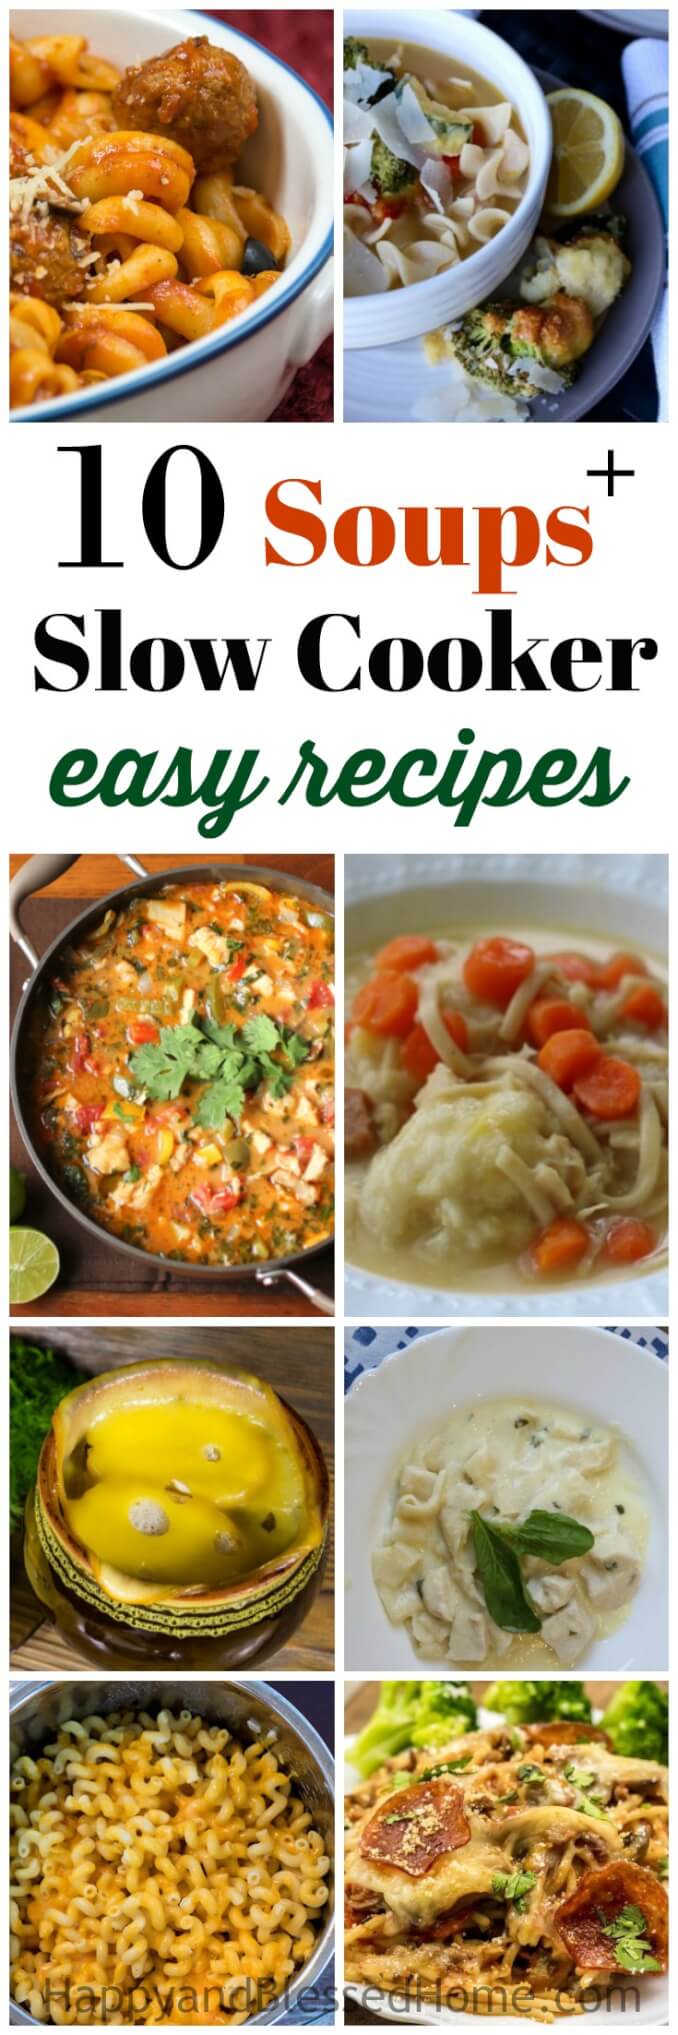  10 Slow Cooker and Soup Recipes - Everything looks so meaty, hearty, and packed with veggies. It starts with with pasta and meatballs, than bake up some parmesan vegetable croutons, then a side of layered goodness in the Brazilian Fish Stew, a make-ahead dumpling and chicken noodle soup recipe, and and finally, a slow cooker French onion soup recipe.  